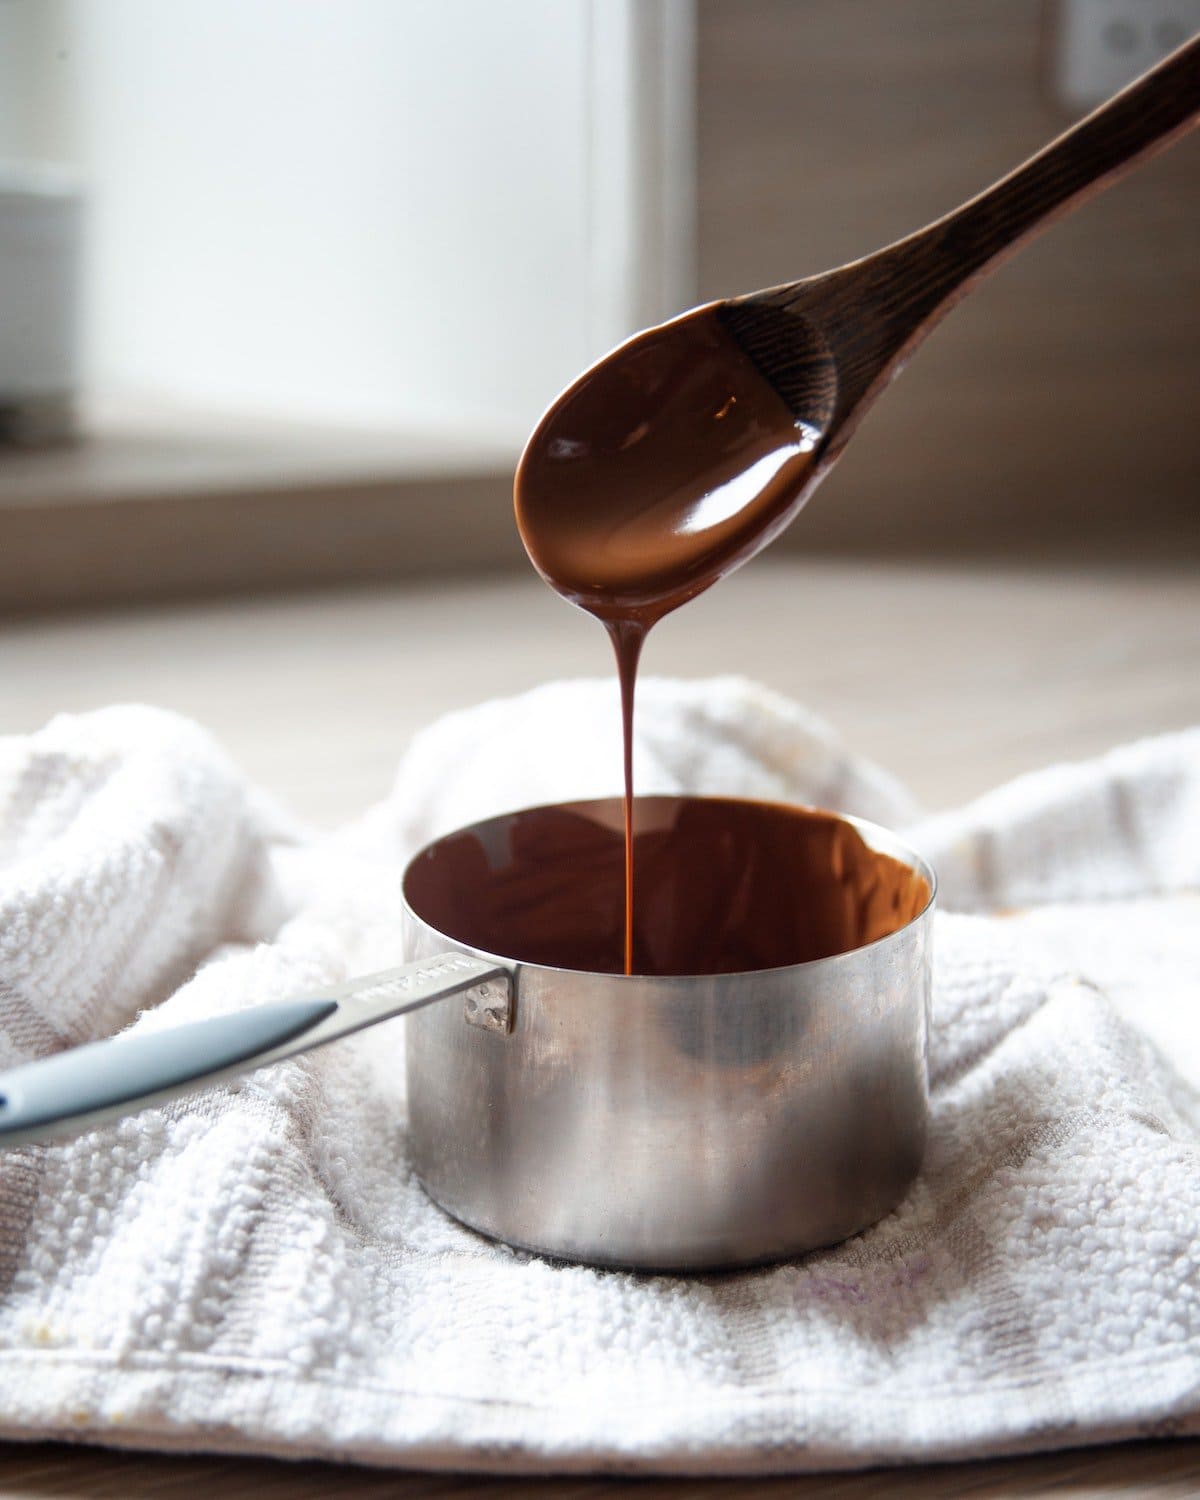 How to Make Melted Chocolate Thinner